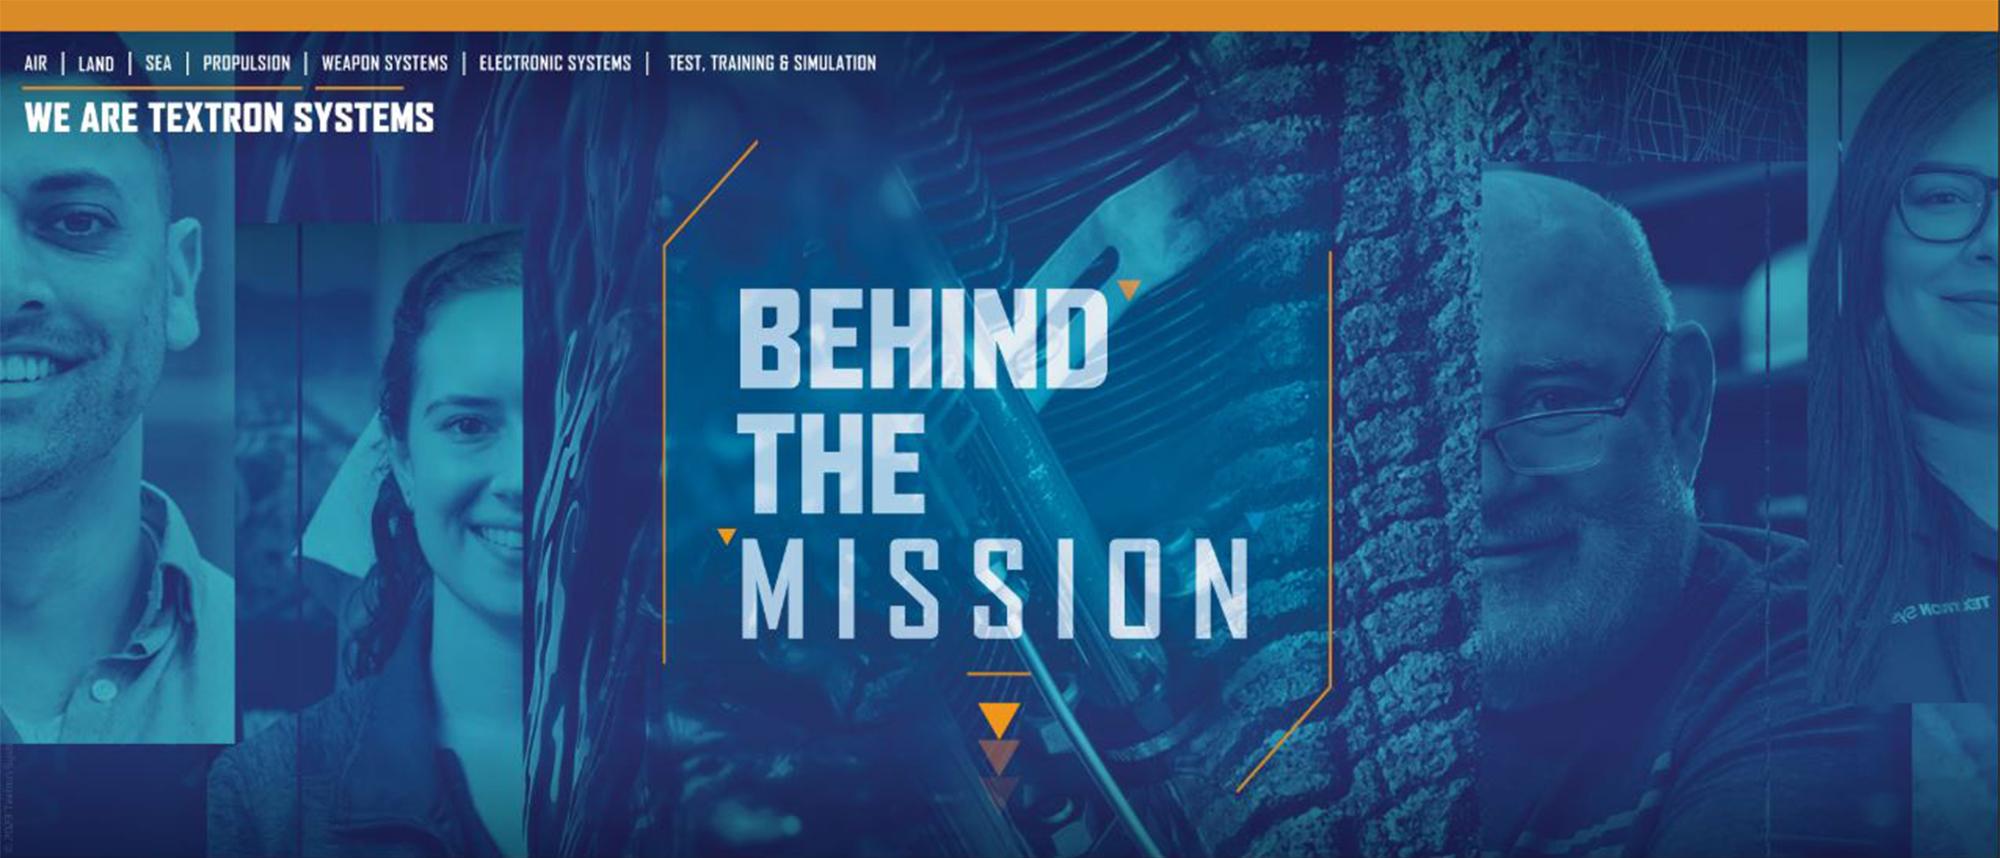 Behind the Mission